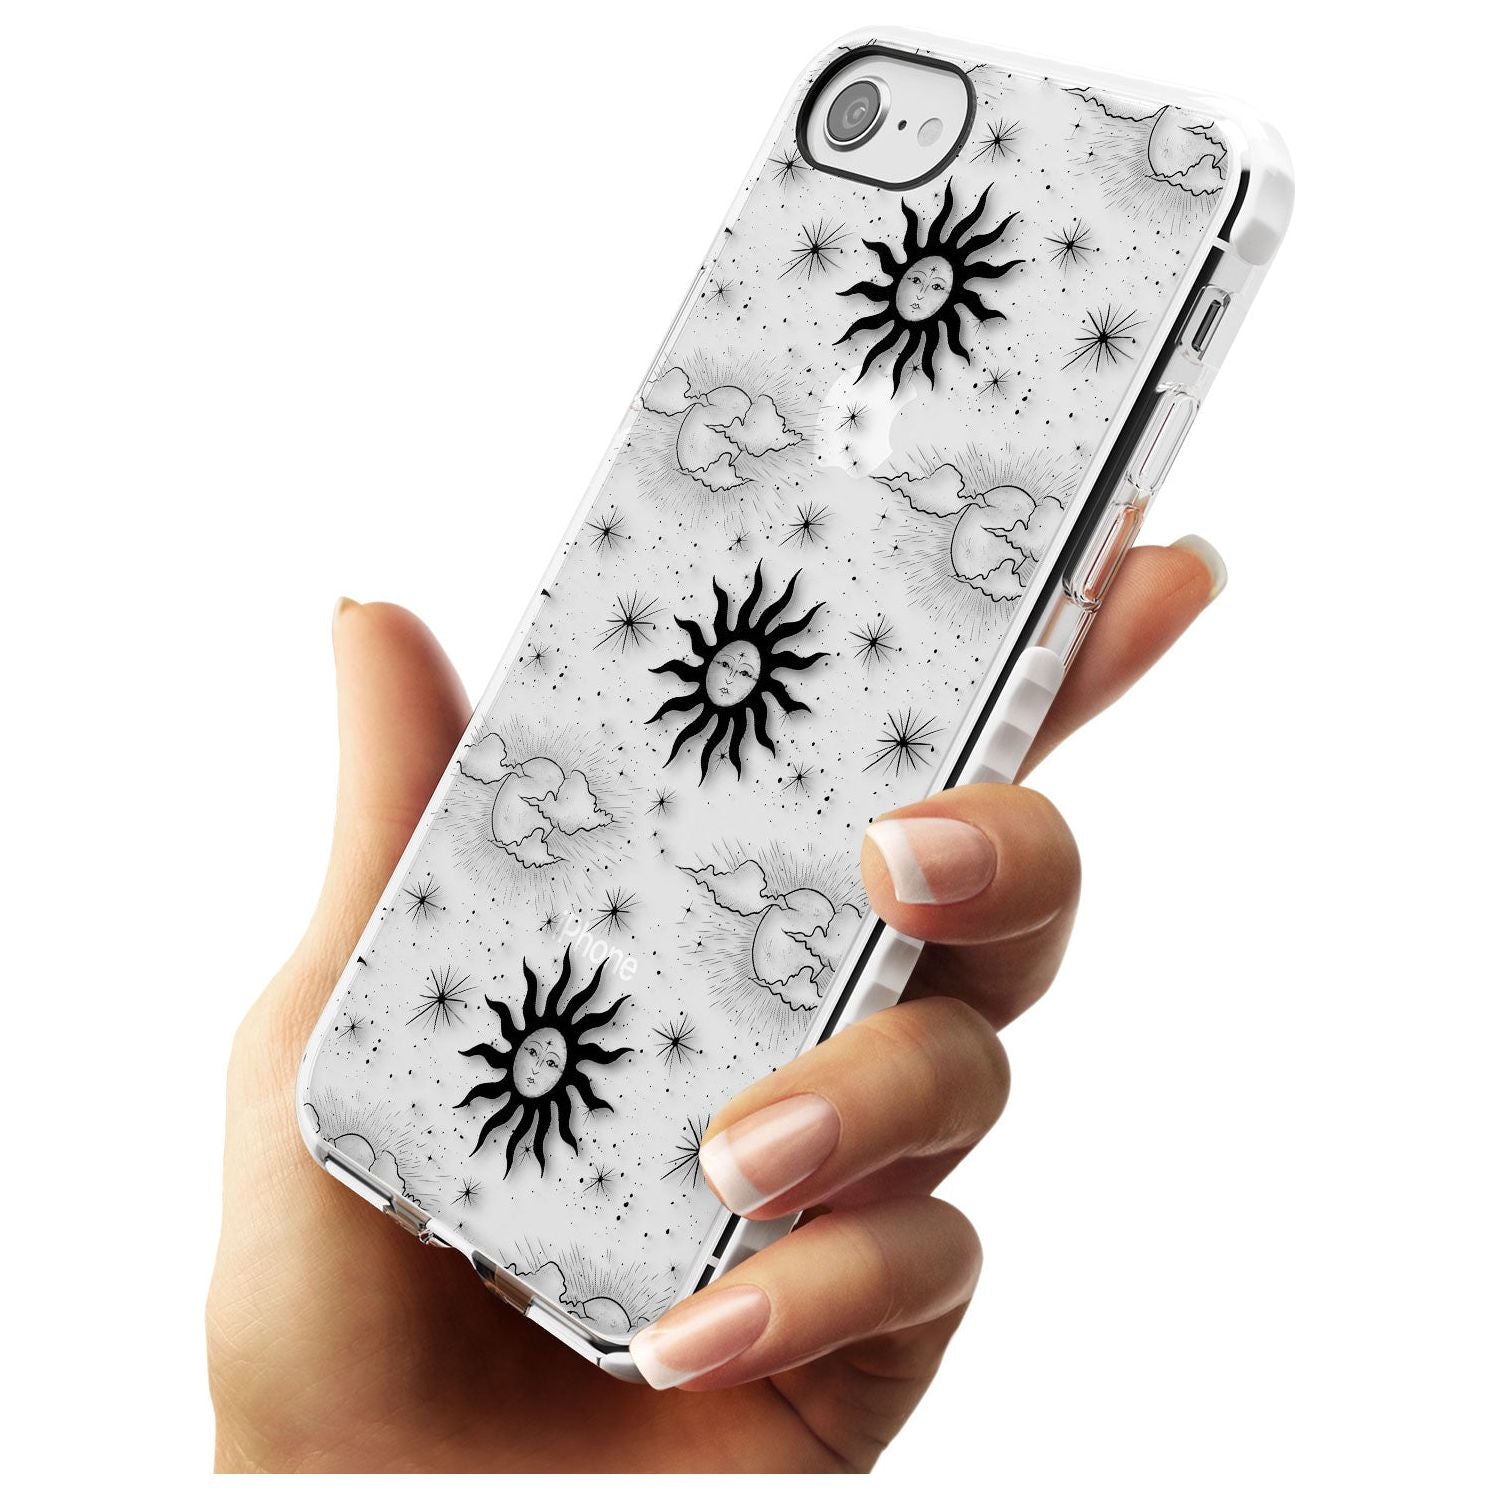 Suns & Clouds Vintage Astrological Impact Phone Case for iPhone SE 8 7 Plus